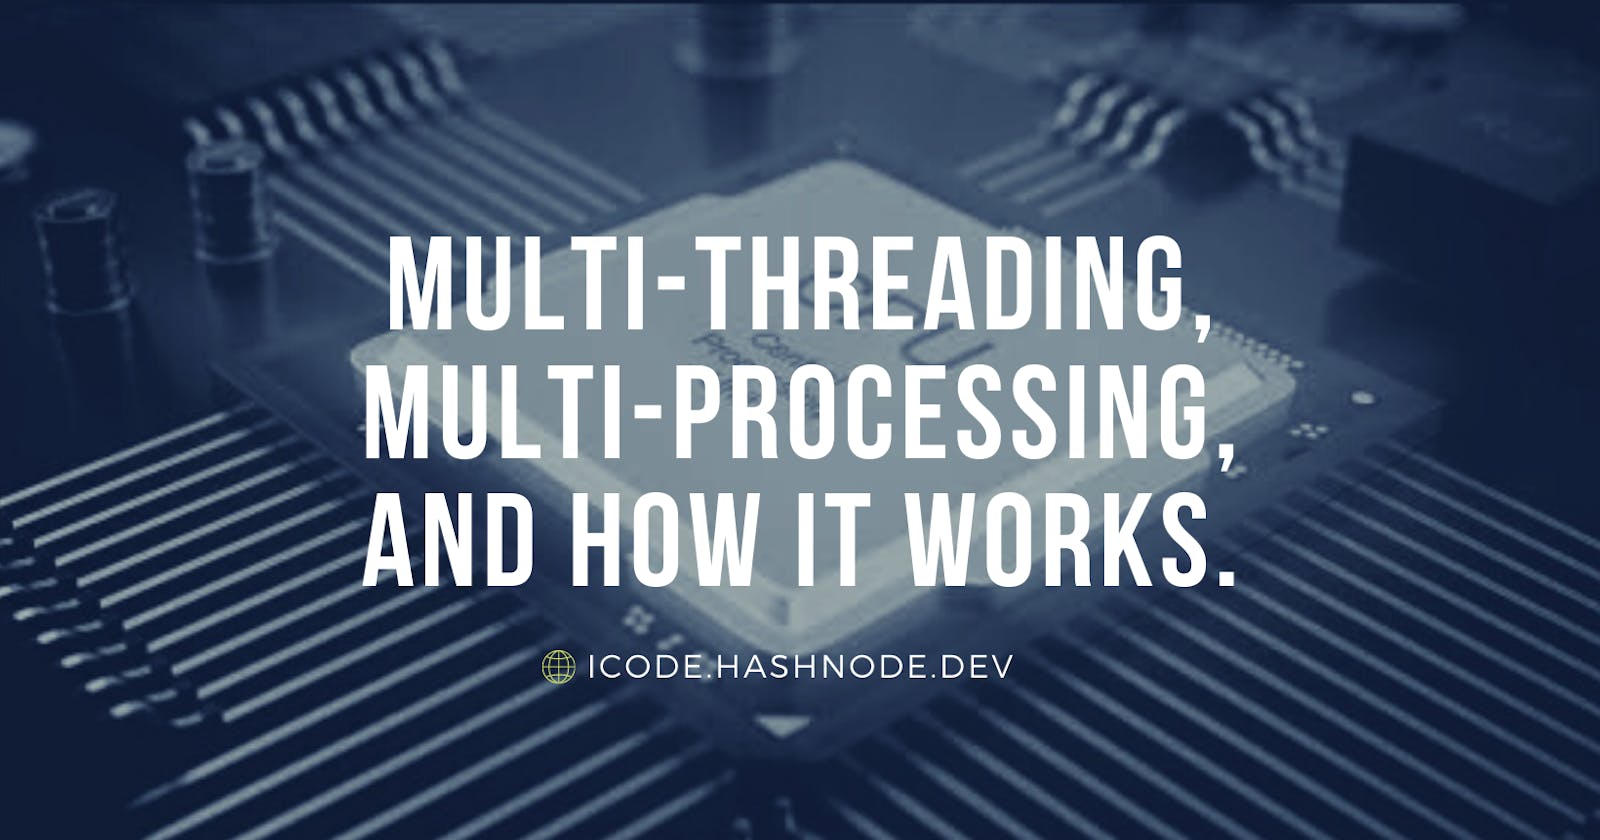 What is Multi-Threading, Multi-Processing and how do they work.